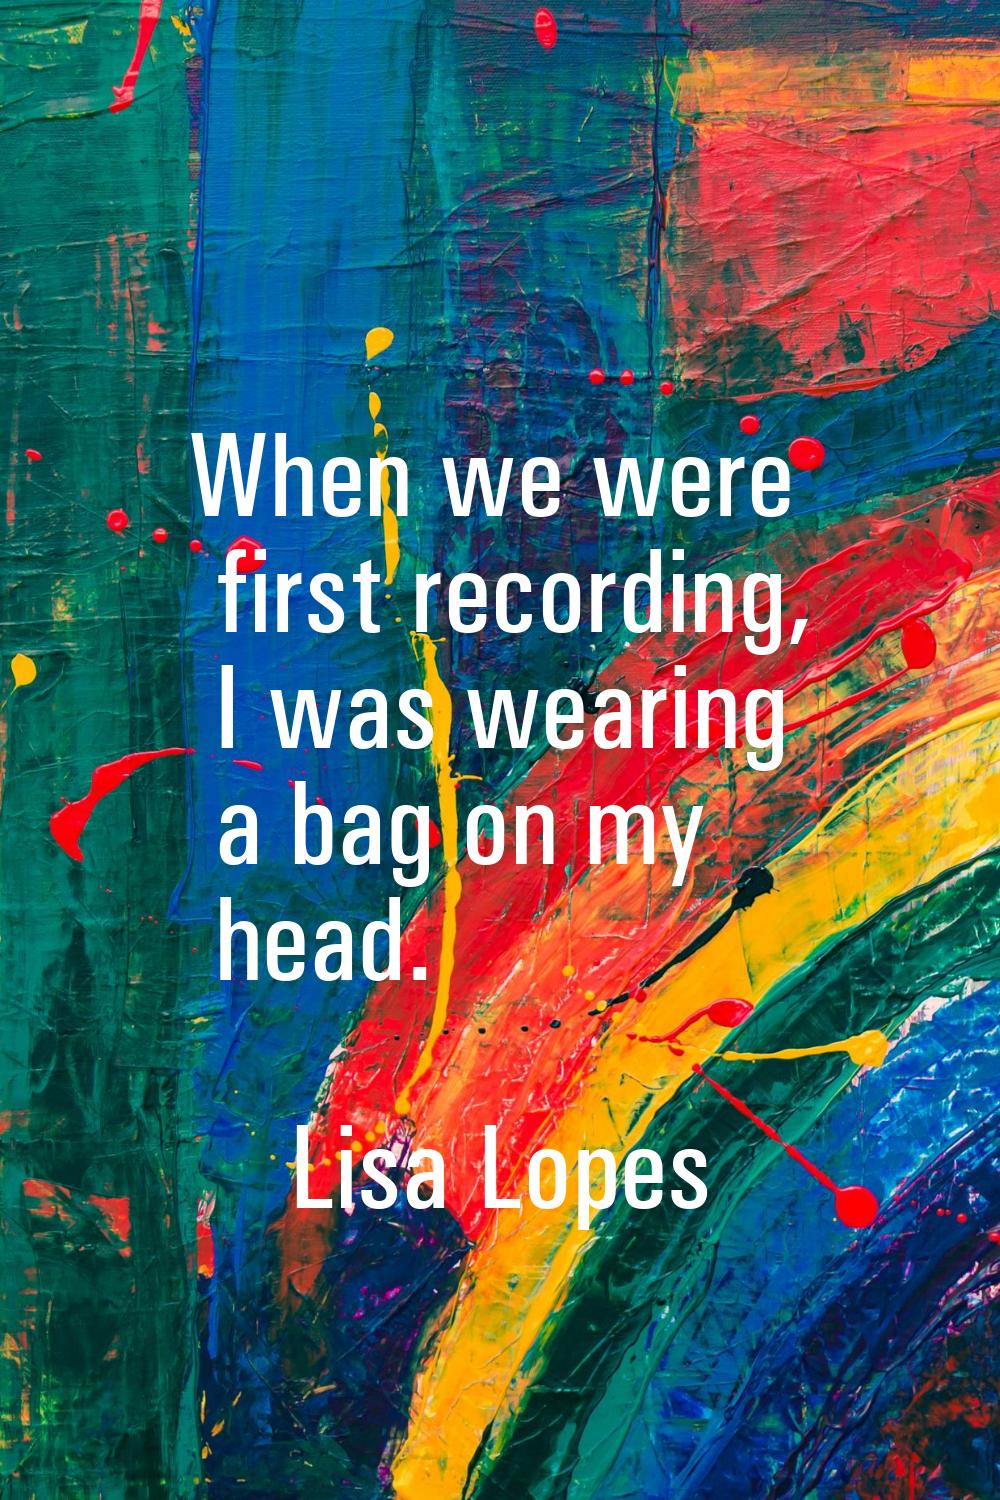 When we were first recording, I was wearing a bag on my head.